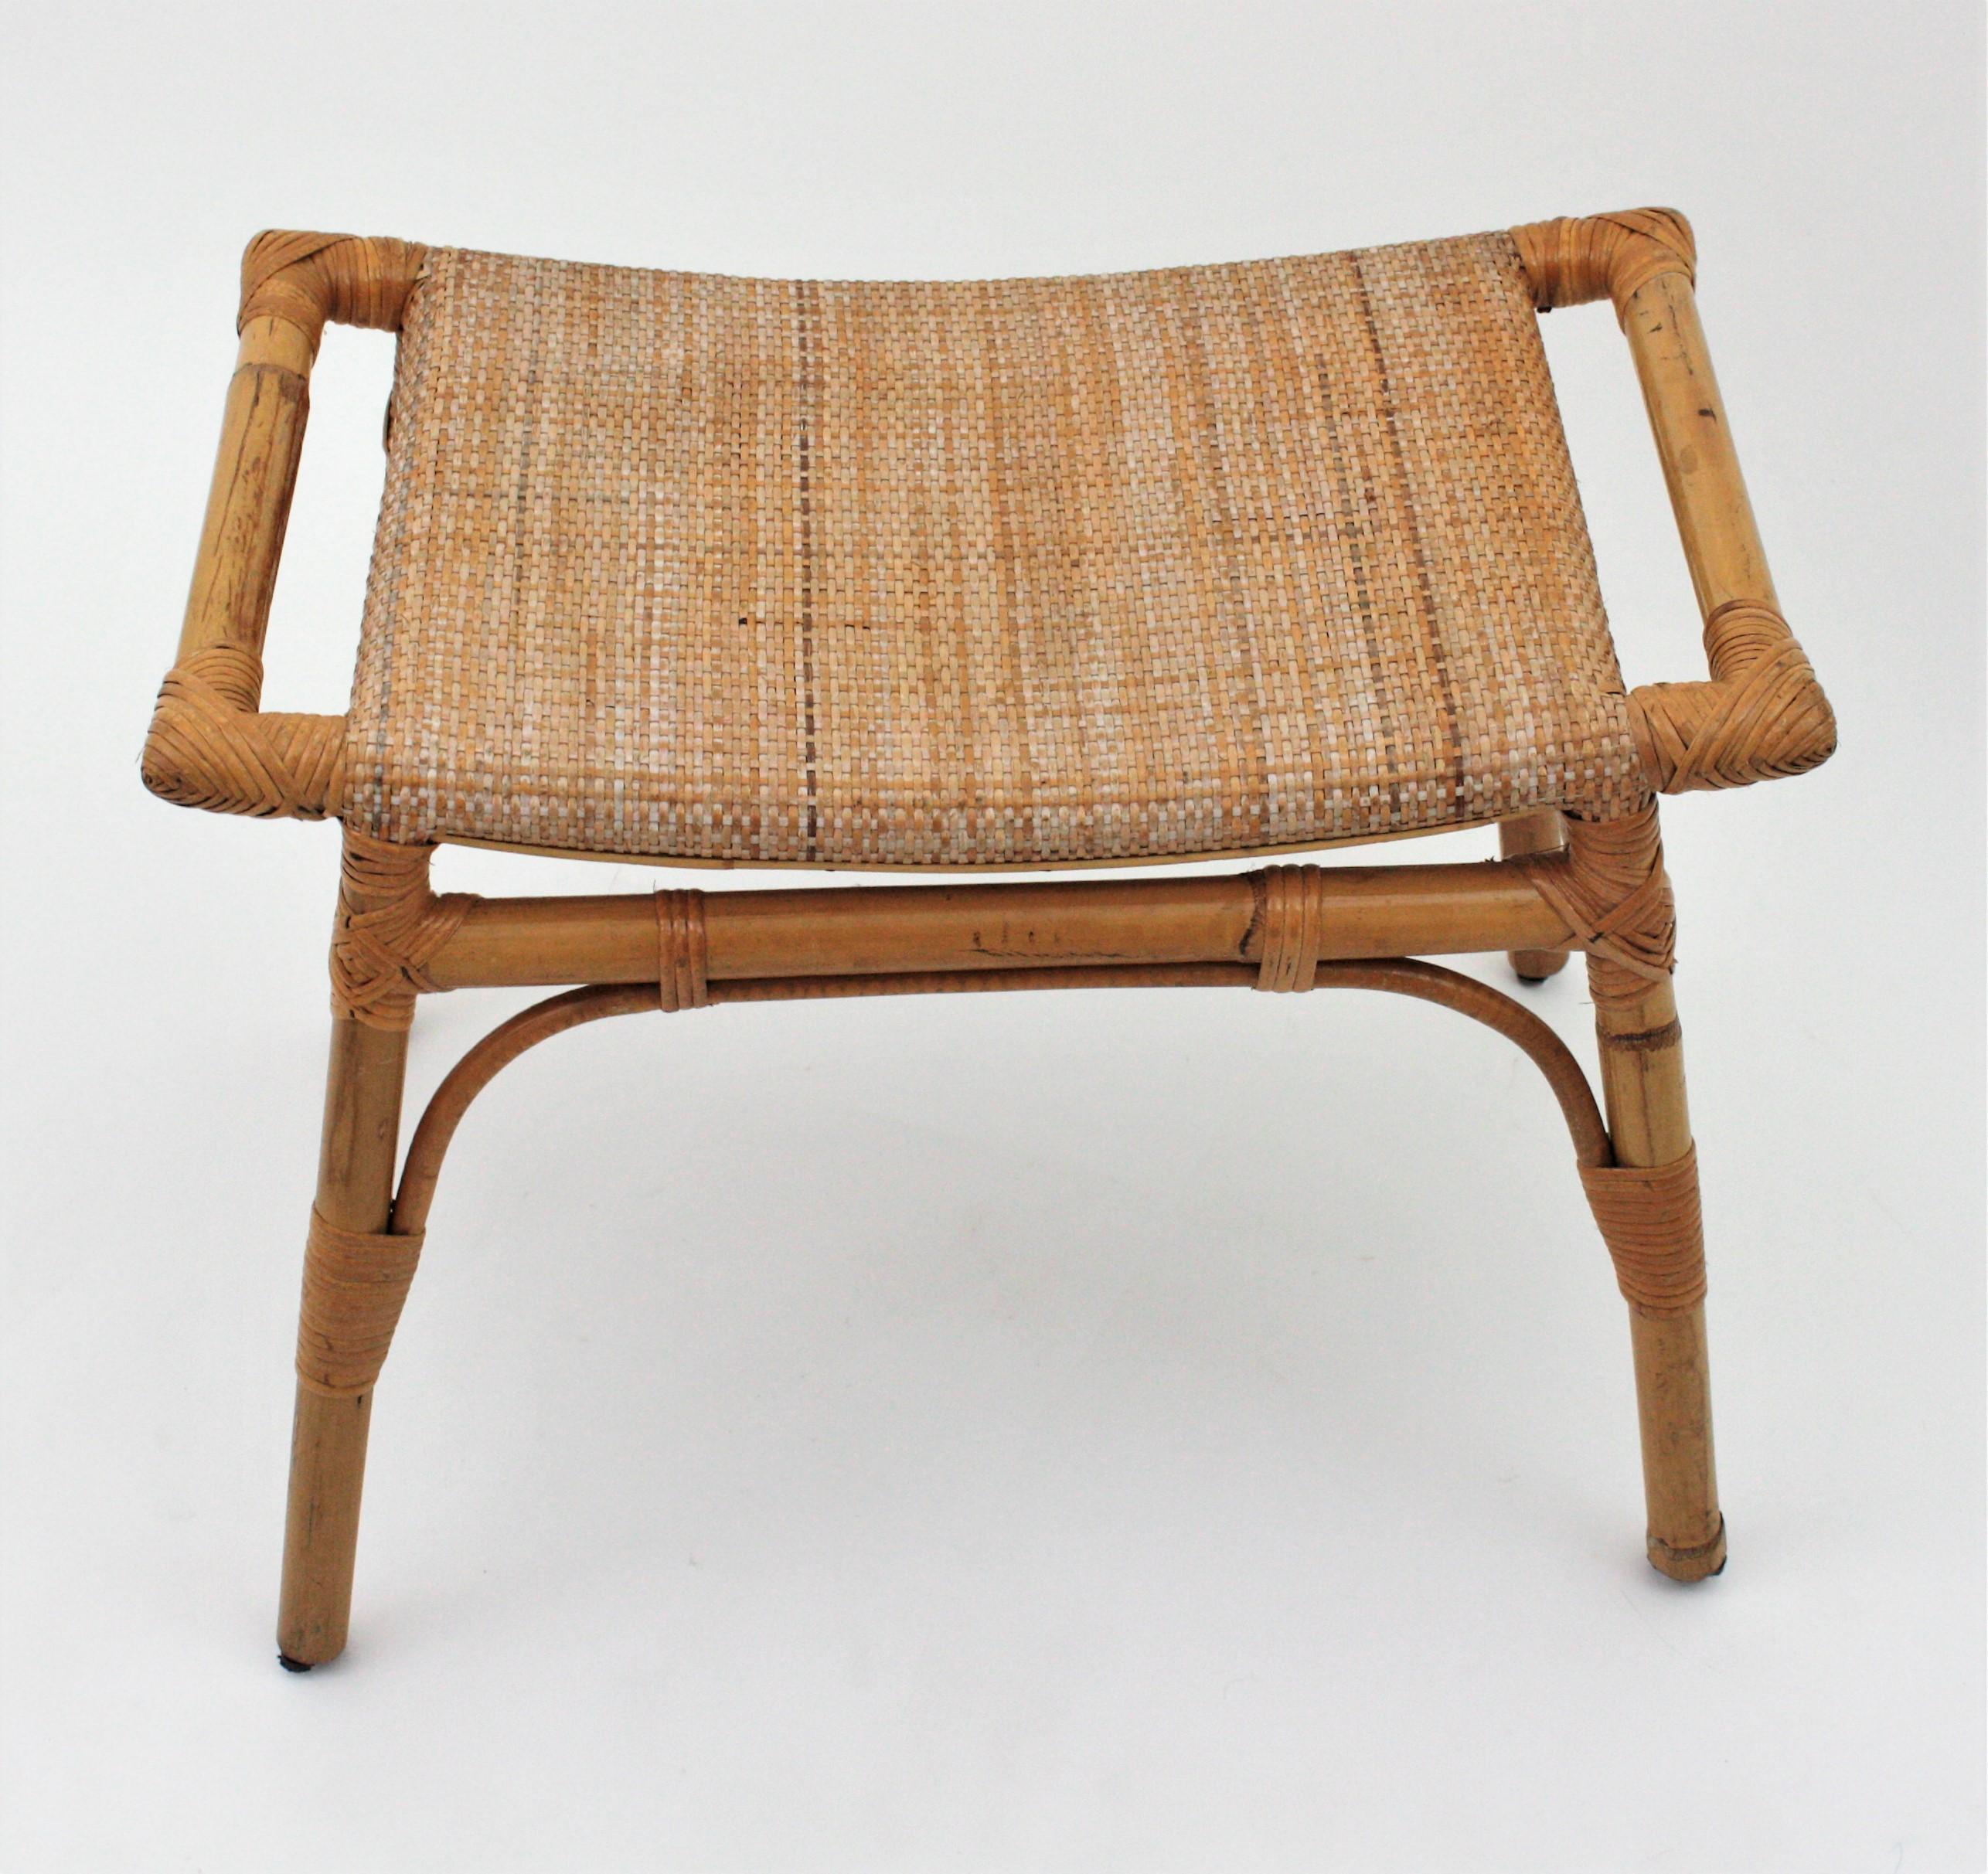 Bamboo Stool, Ottoman or Bench with Cane Seat 8